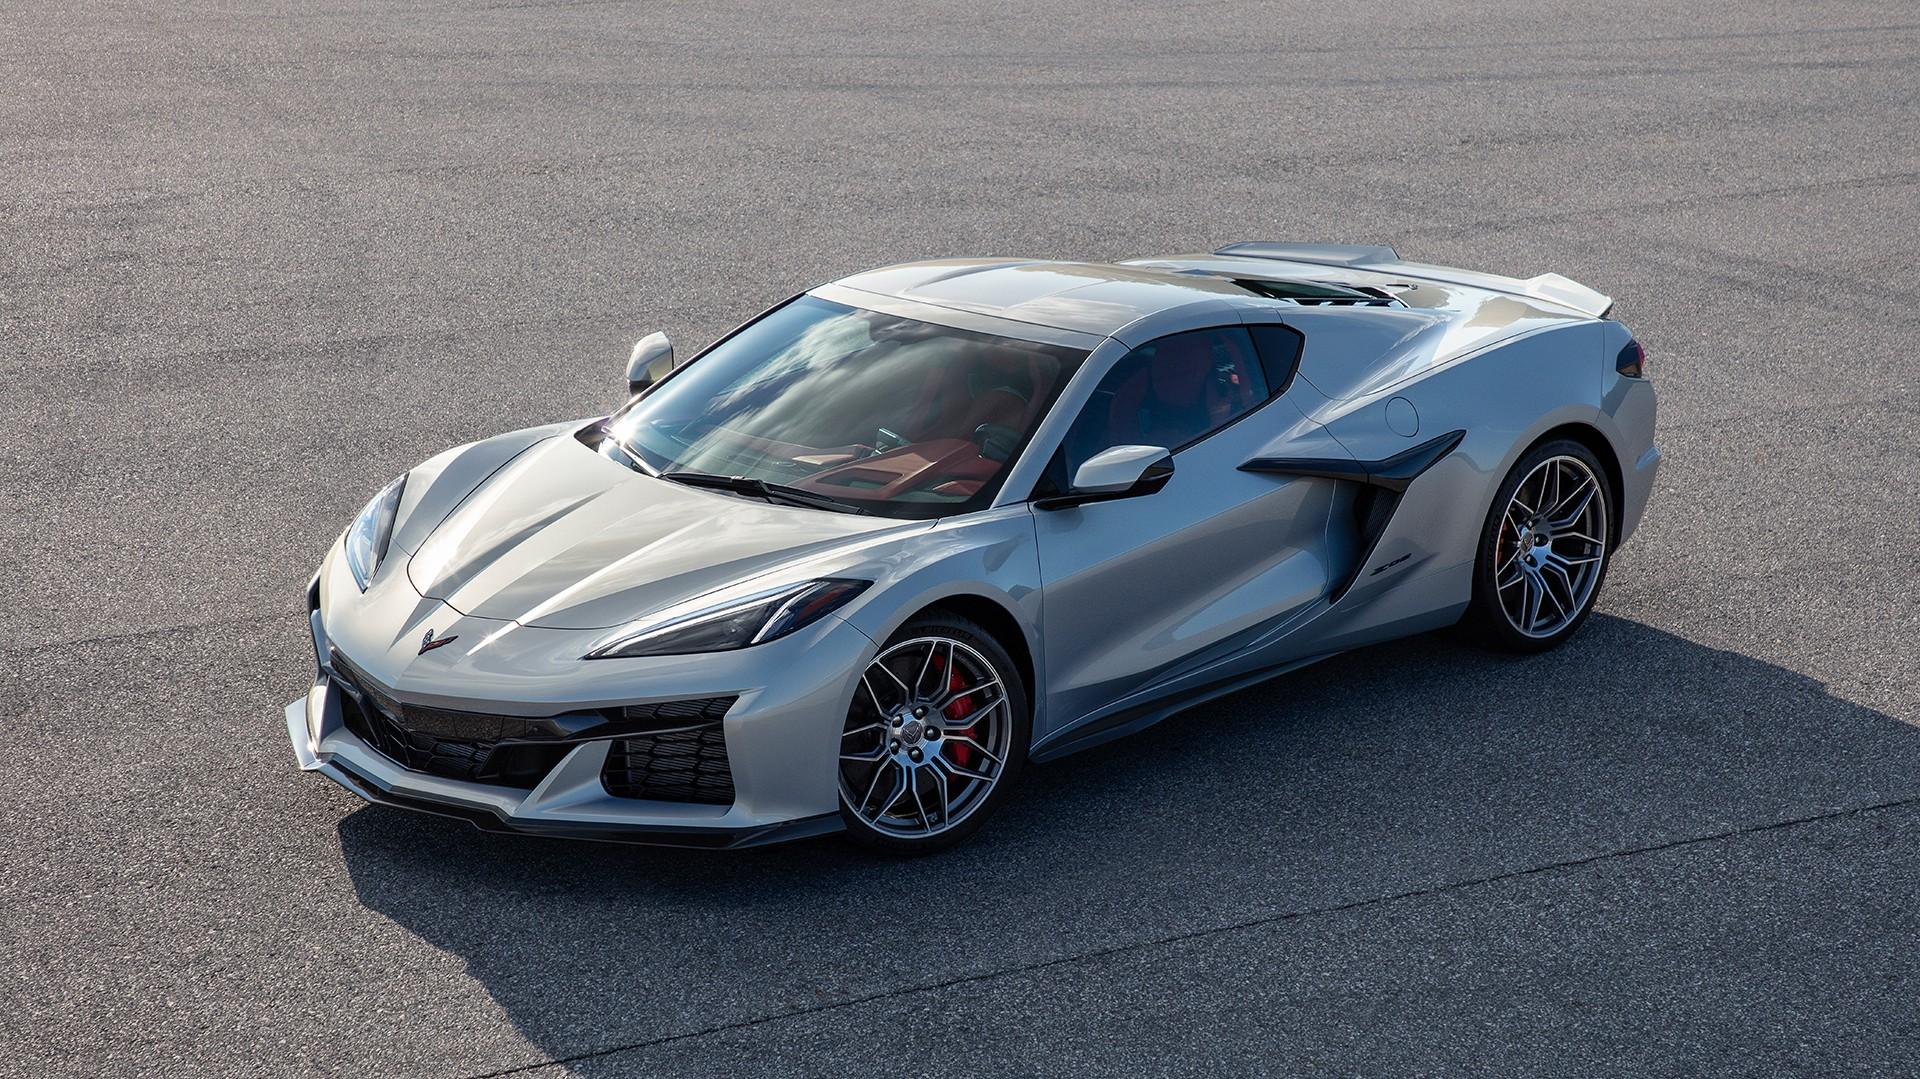 Chevrolet Corvette Z06 First Official Photo Reveals Widebody